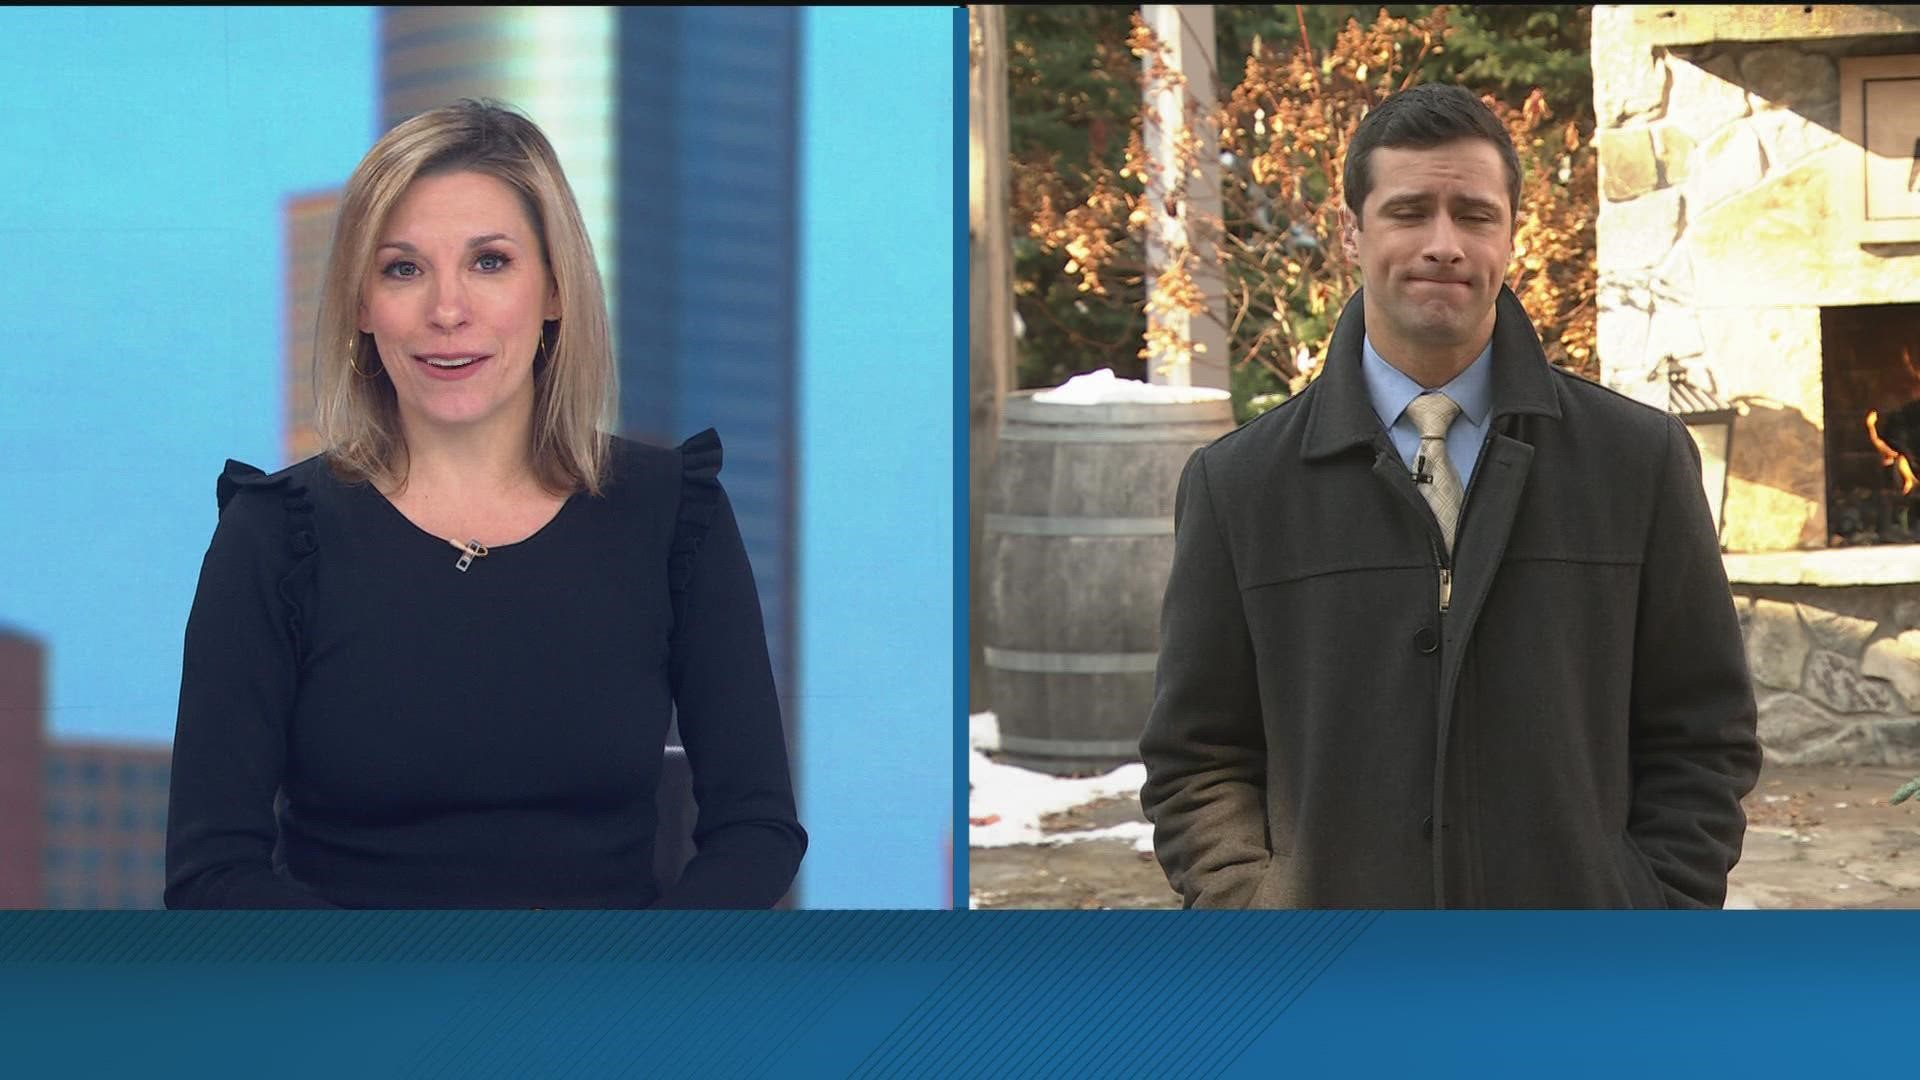 Watch the latest news and weather updates on KARE 11 News Now for Nov. 23, 2022.